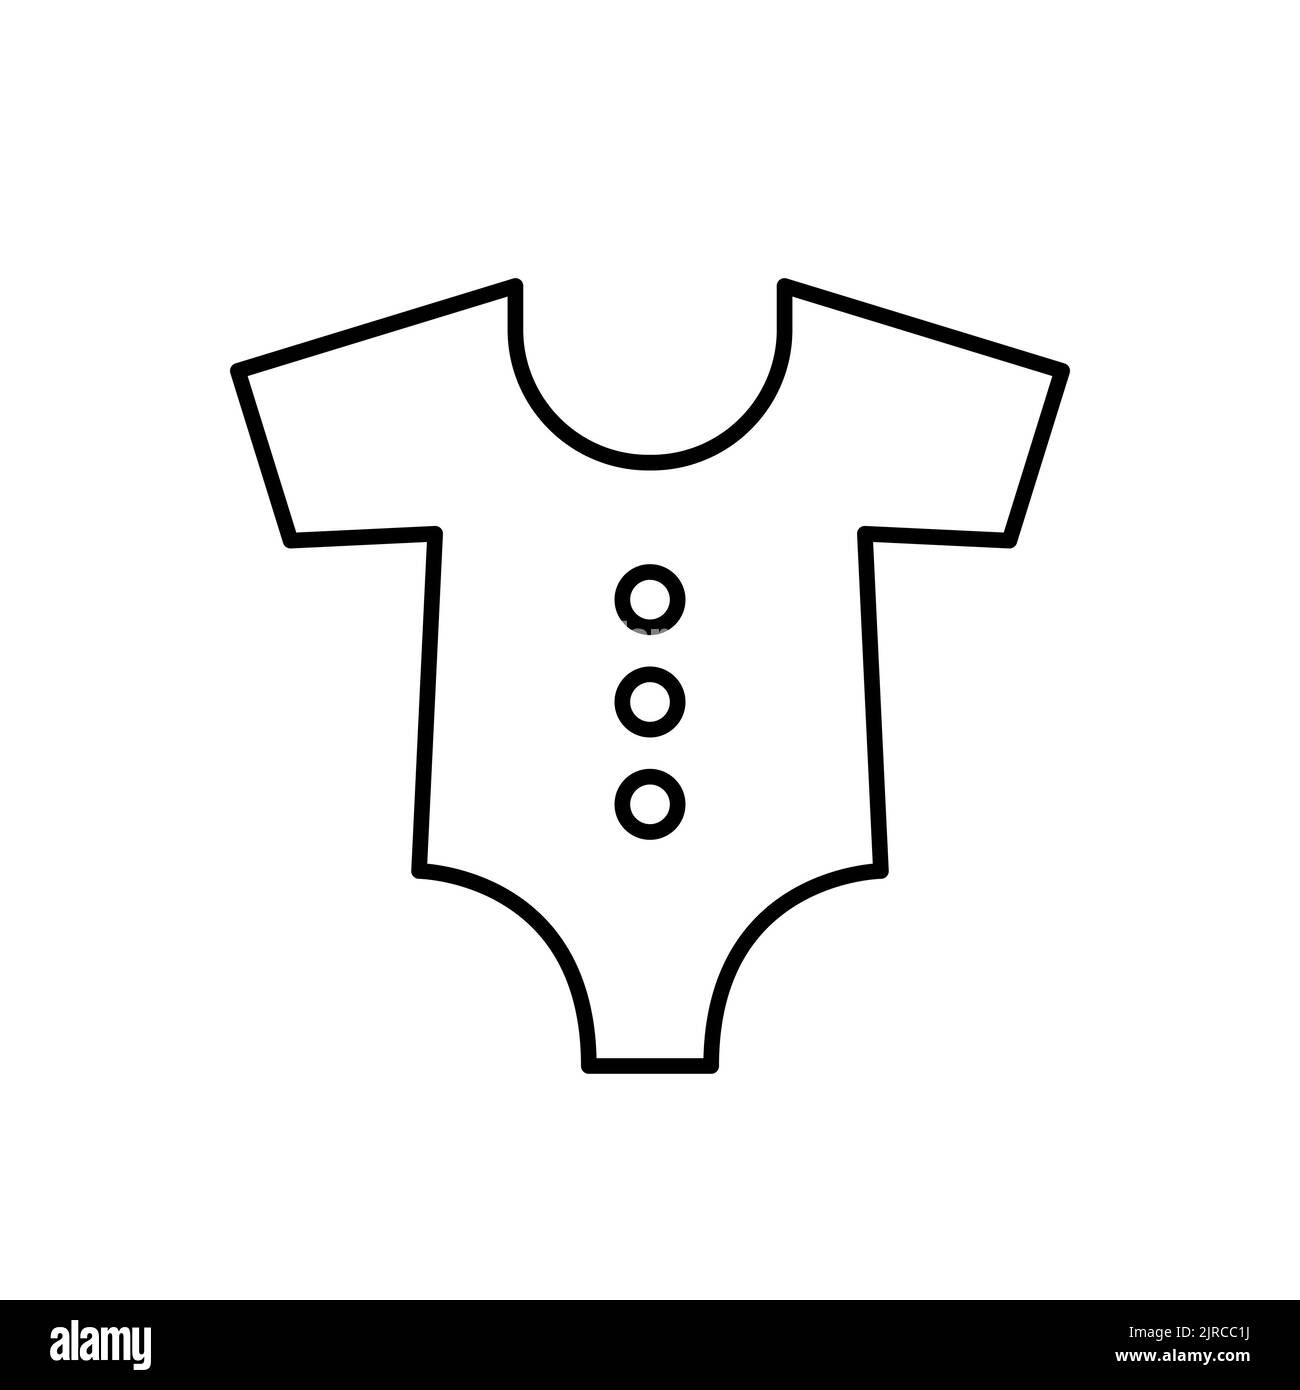 Simple baby bodysuit outline vector icon. EPS 10.. Kids fashion flat clothes.... Newborns bodysuits. Basic baby clothing. Body children front side.... Stock Photo